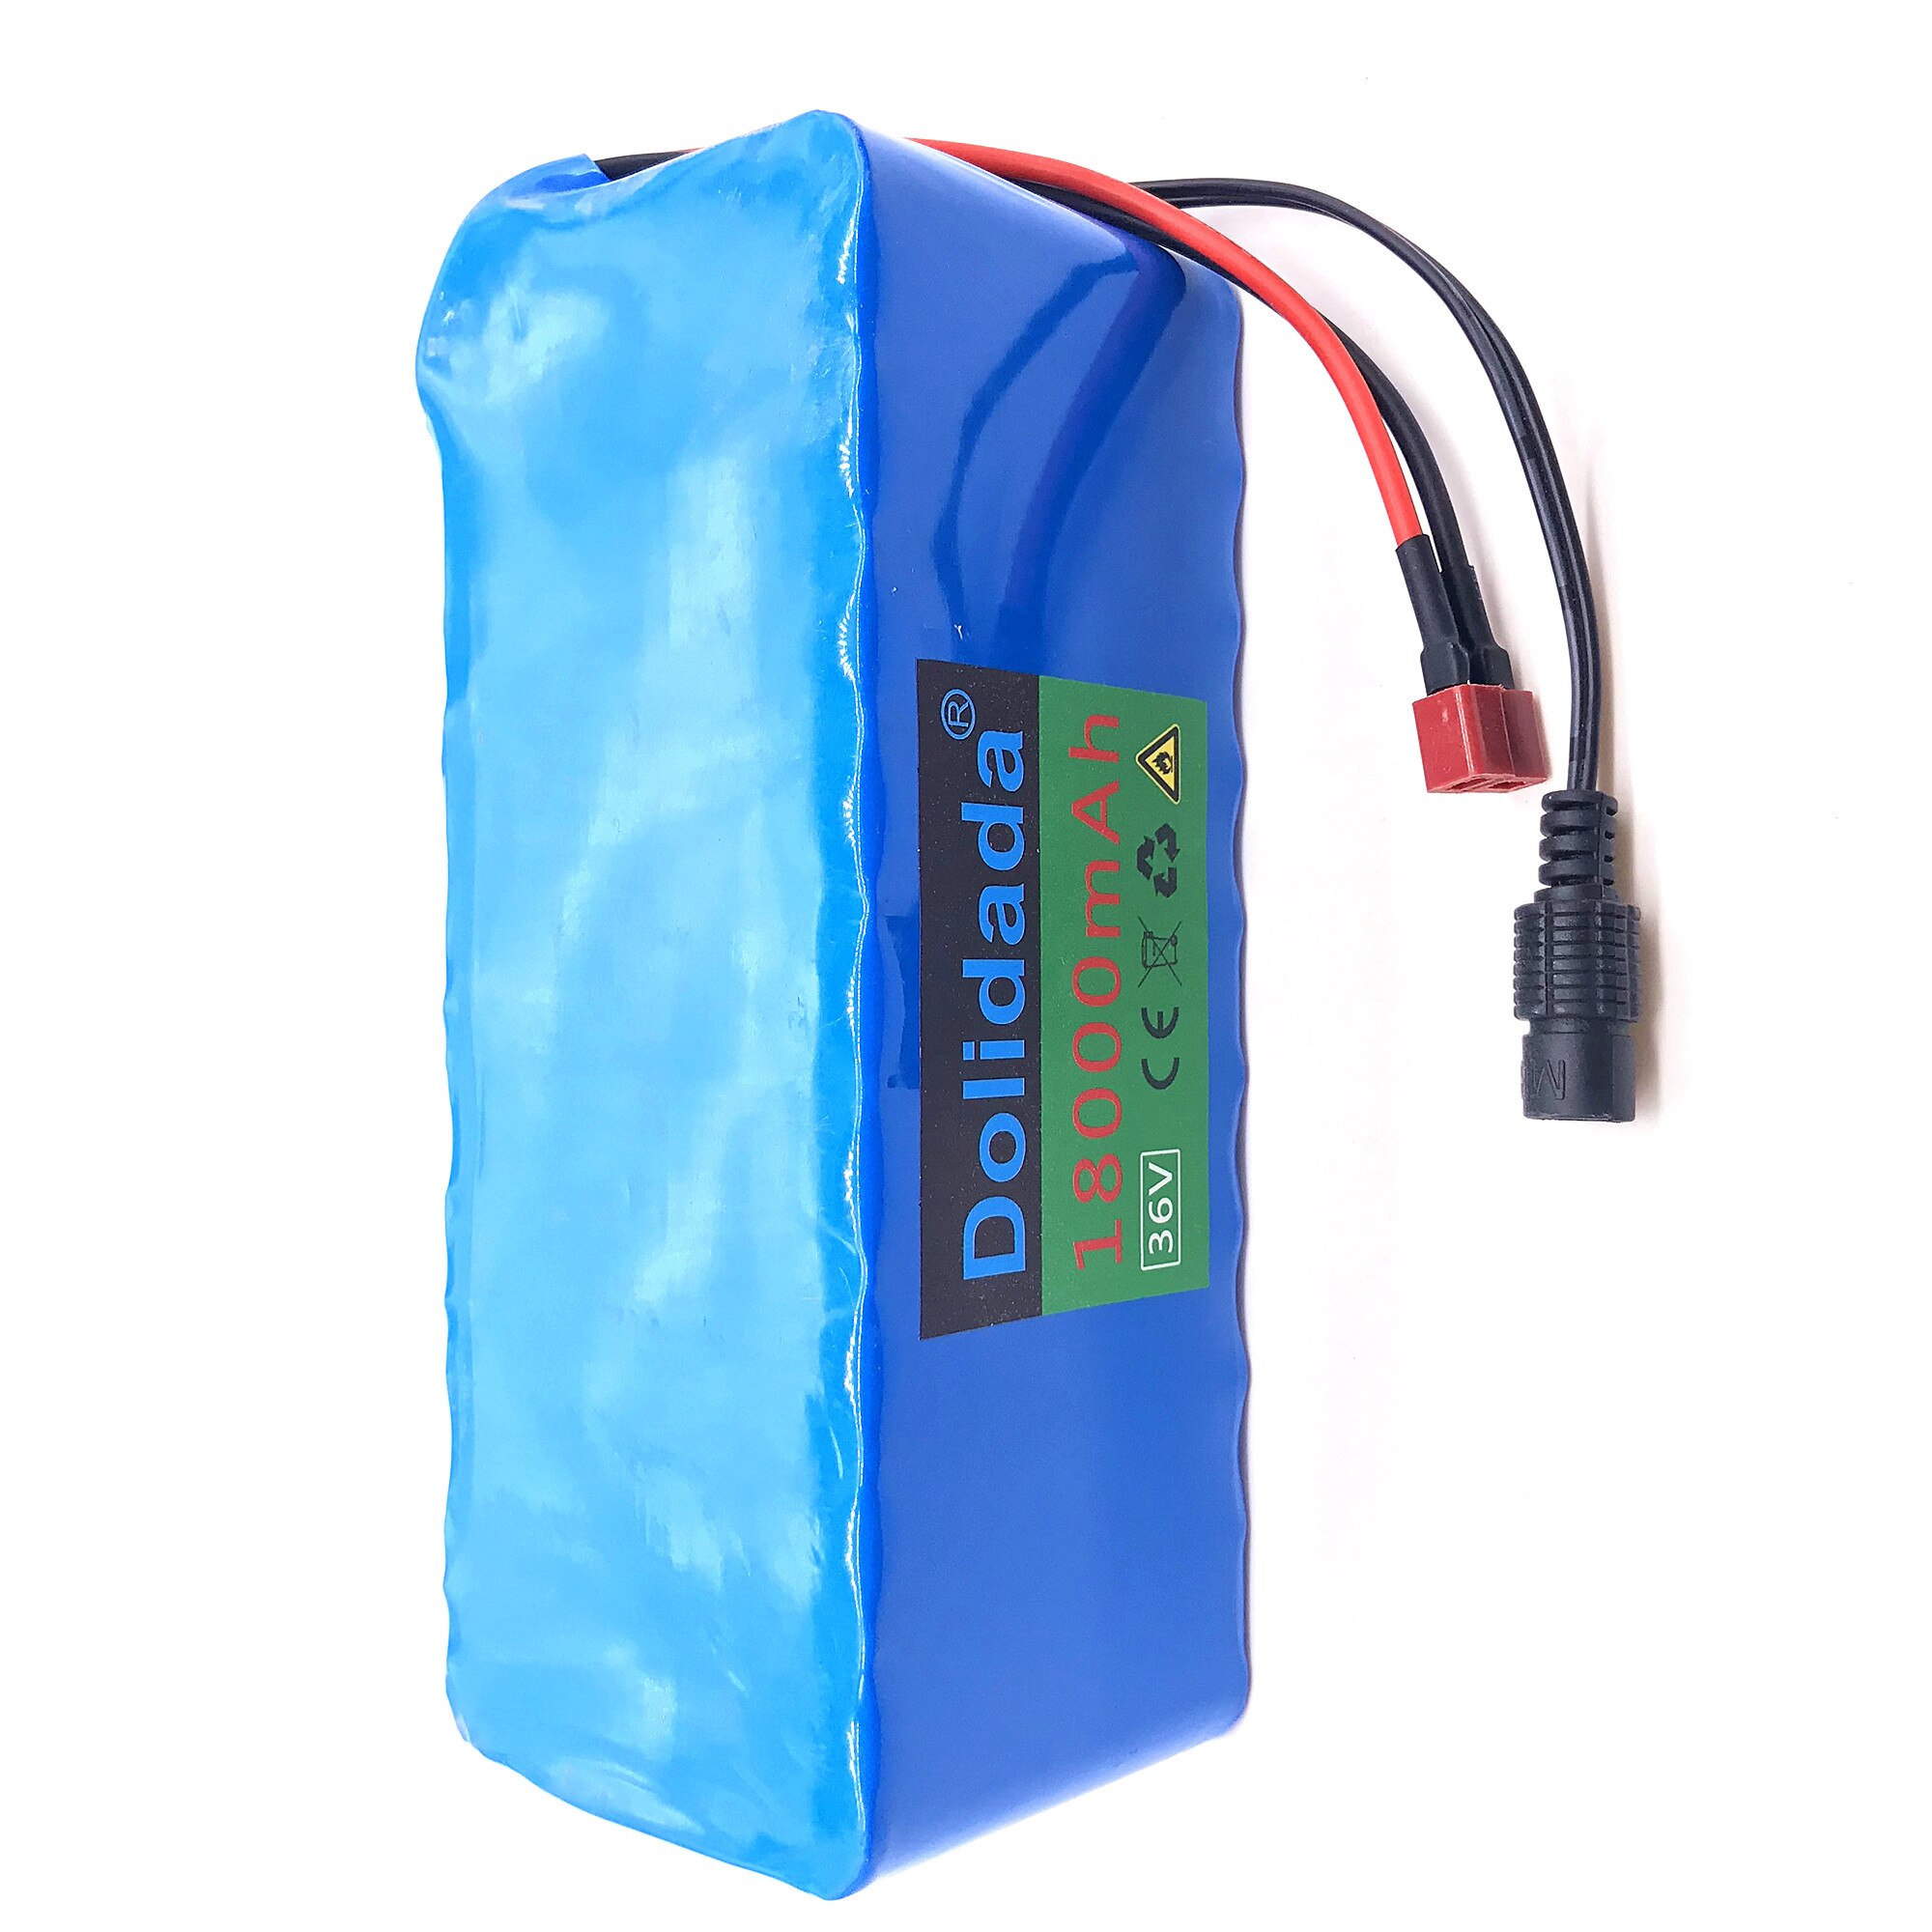 original 36V battery pack 10S4P 18000mah 600W high power and high capacity electric motorcycle battery 20A BMS